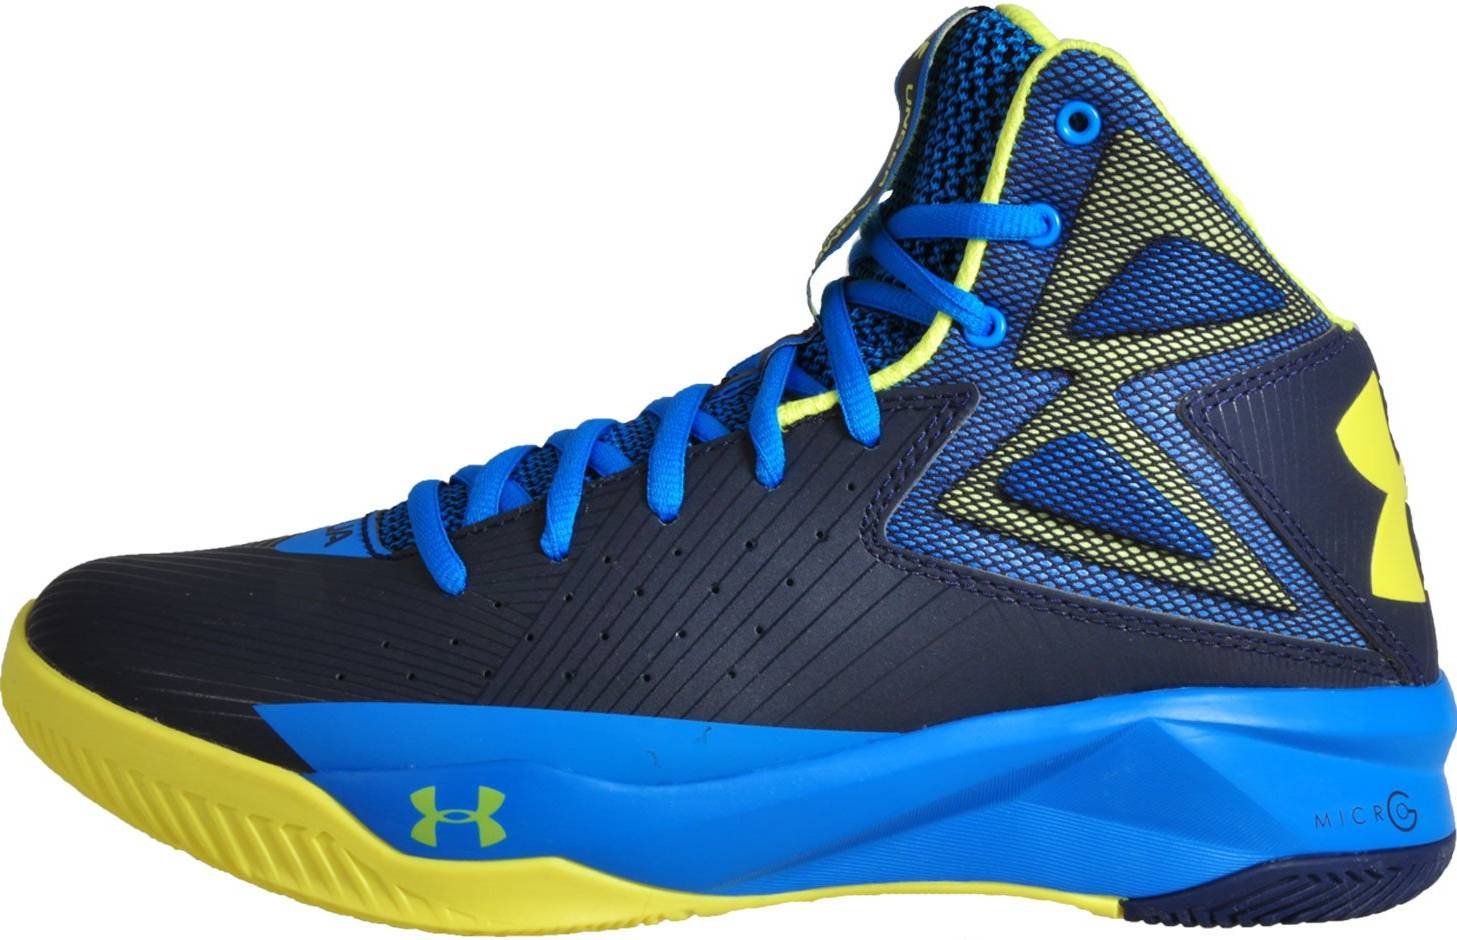 Review of Under Armour Rocket 